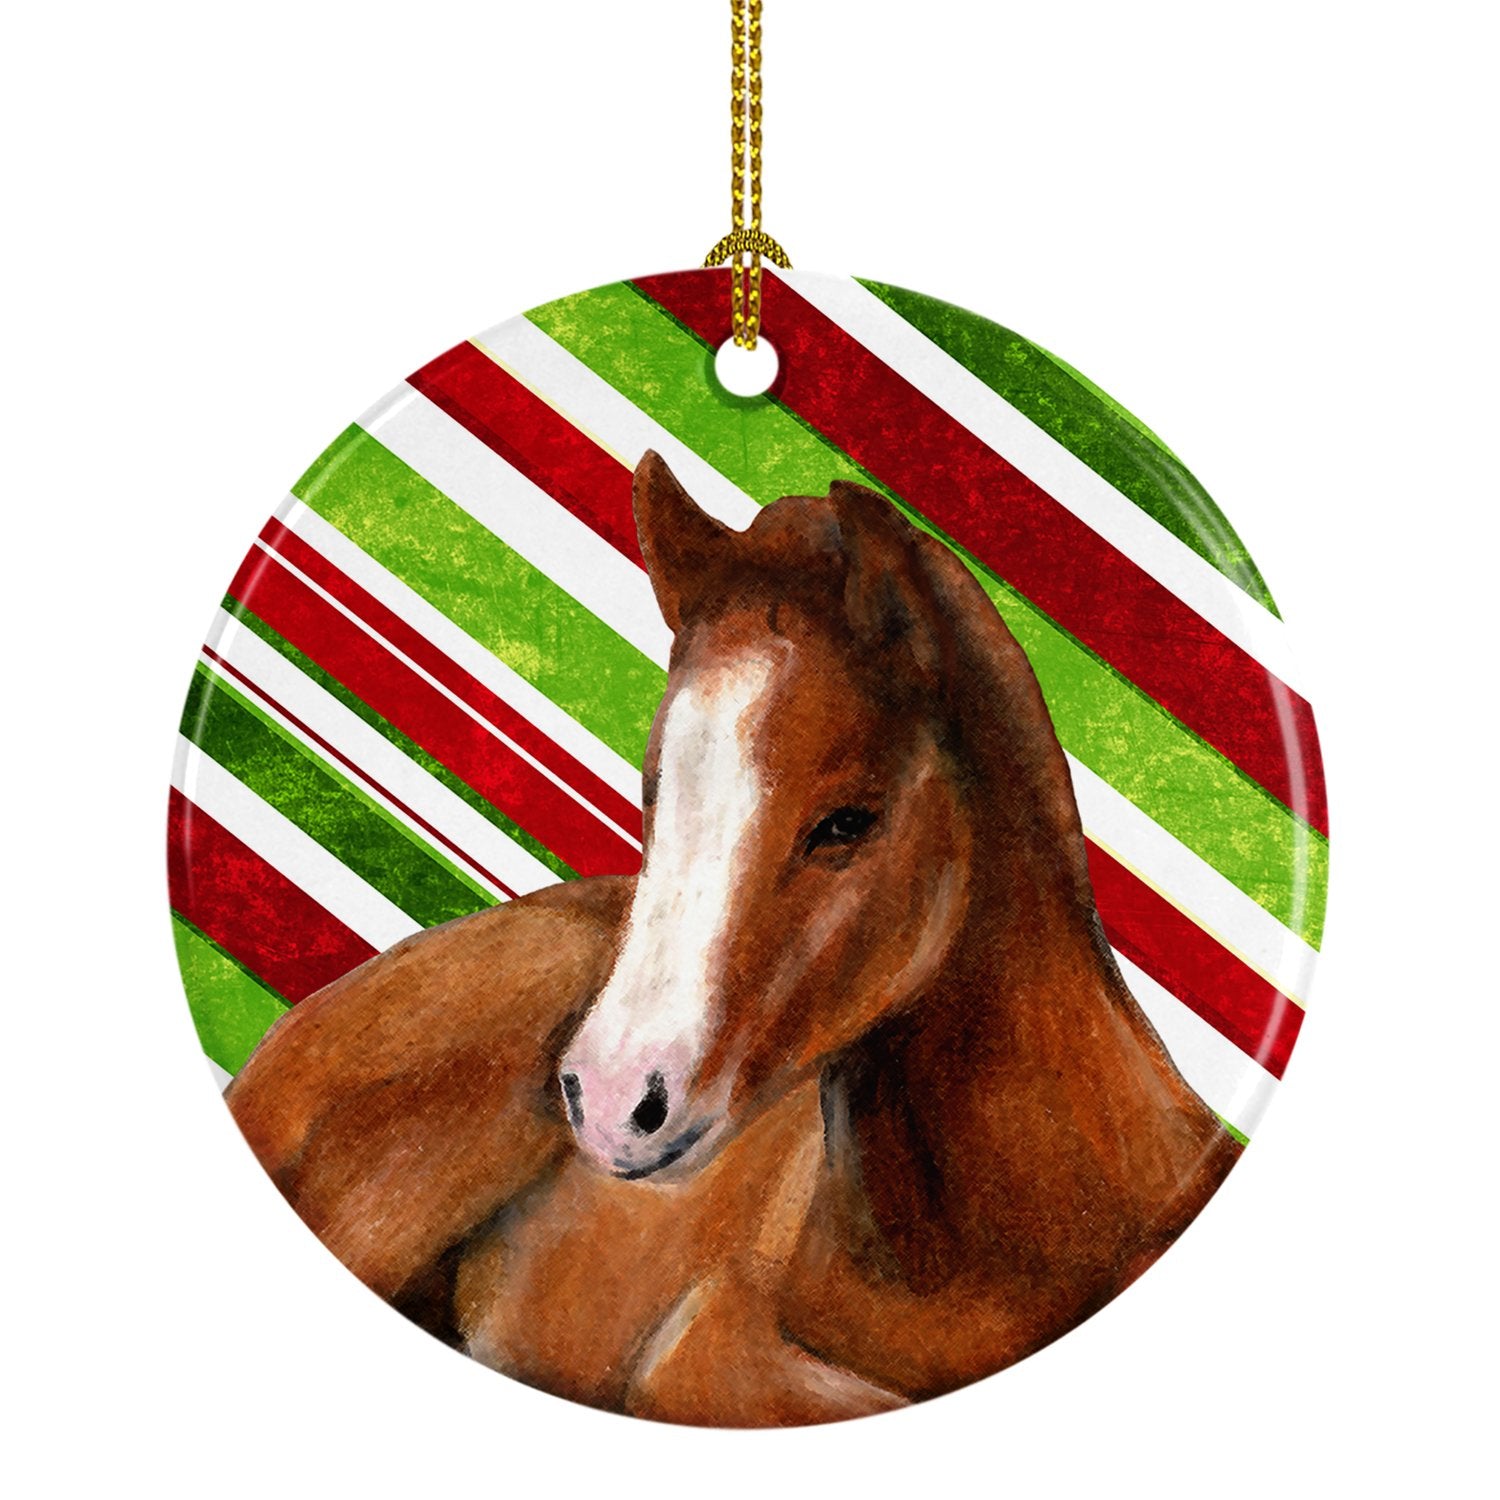 Horse Foal Candy Cane Holiday Christmas Ceramic Ornament SB3131CO1 by Caroline's Treasures